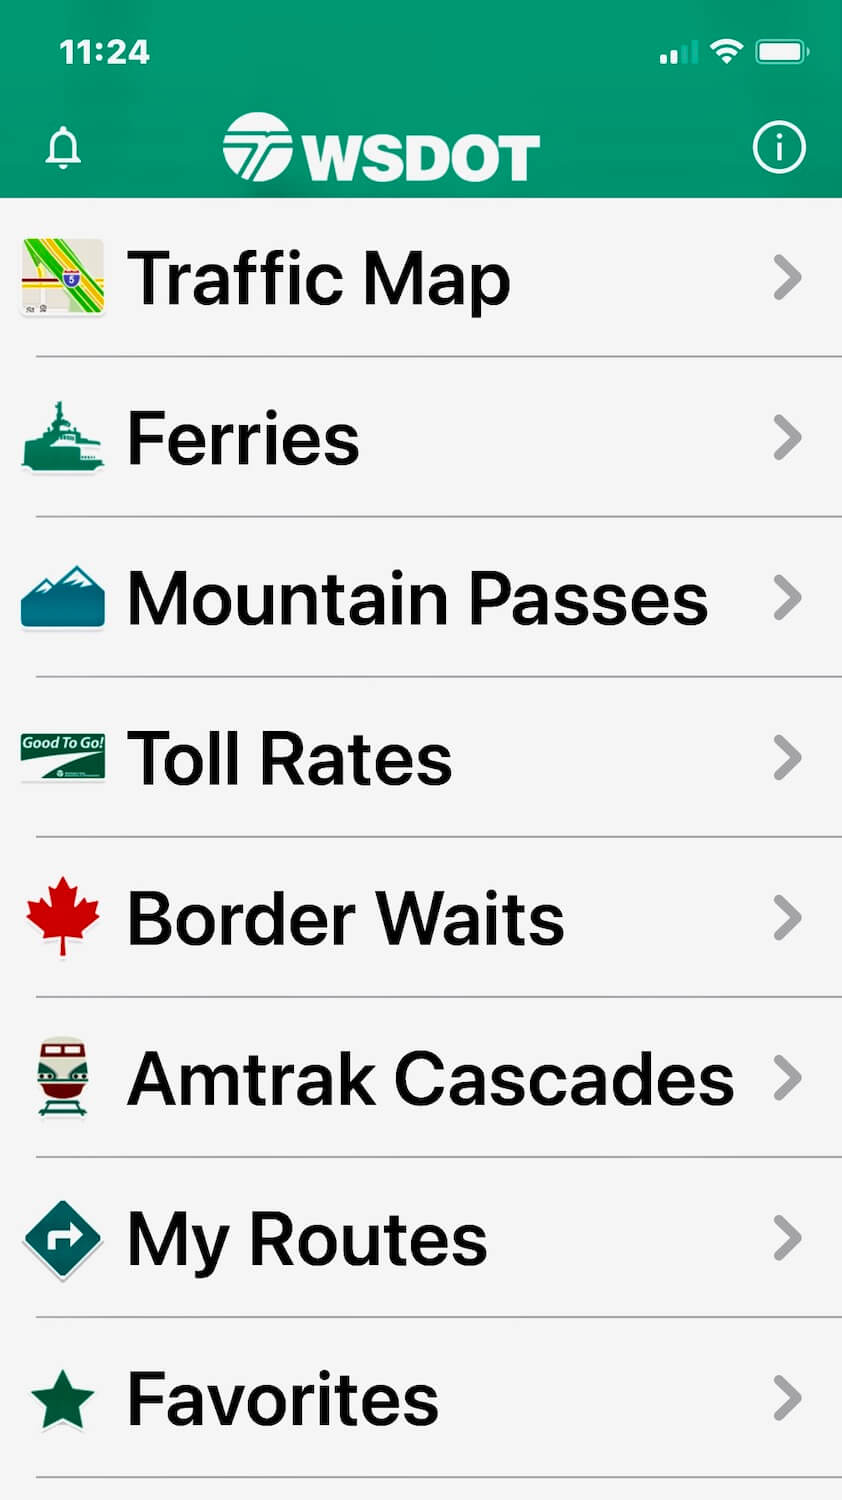 The Washington State Department of Transportation APP offers helpful information for traveling between the United State and Canada, including wait times at the border crossings between Seattle and Vancouver. 